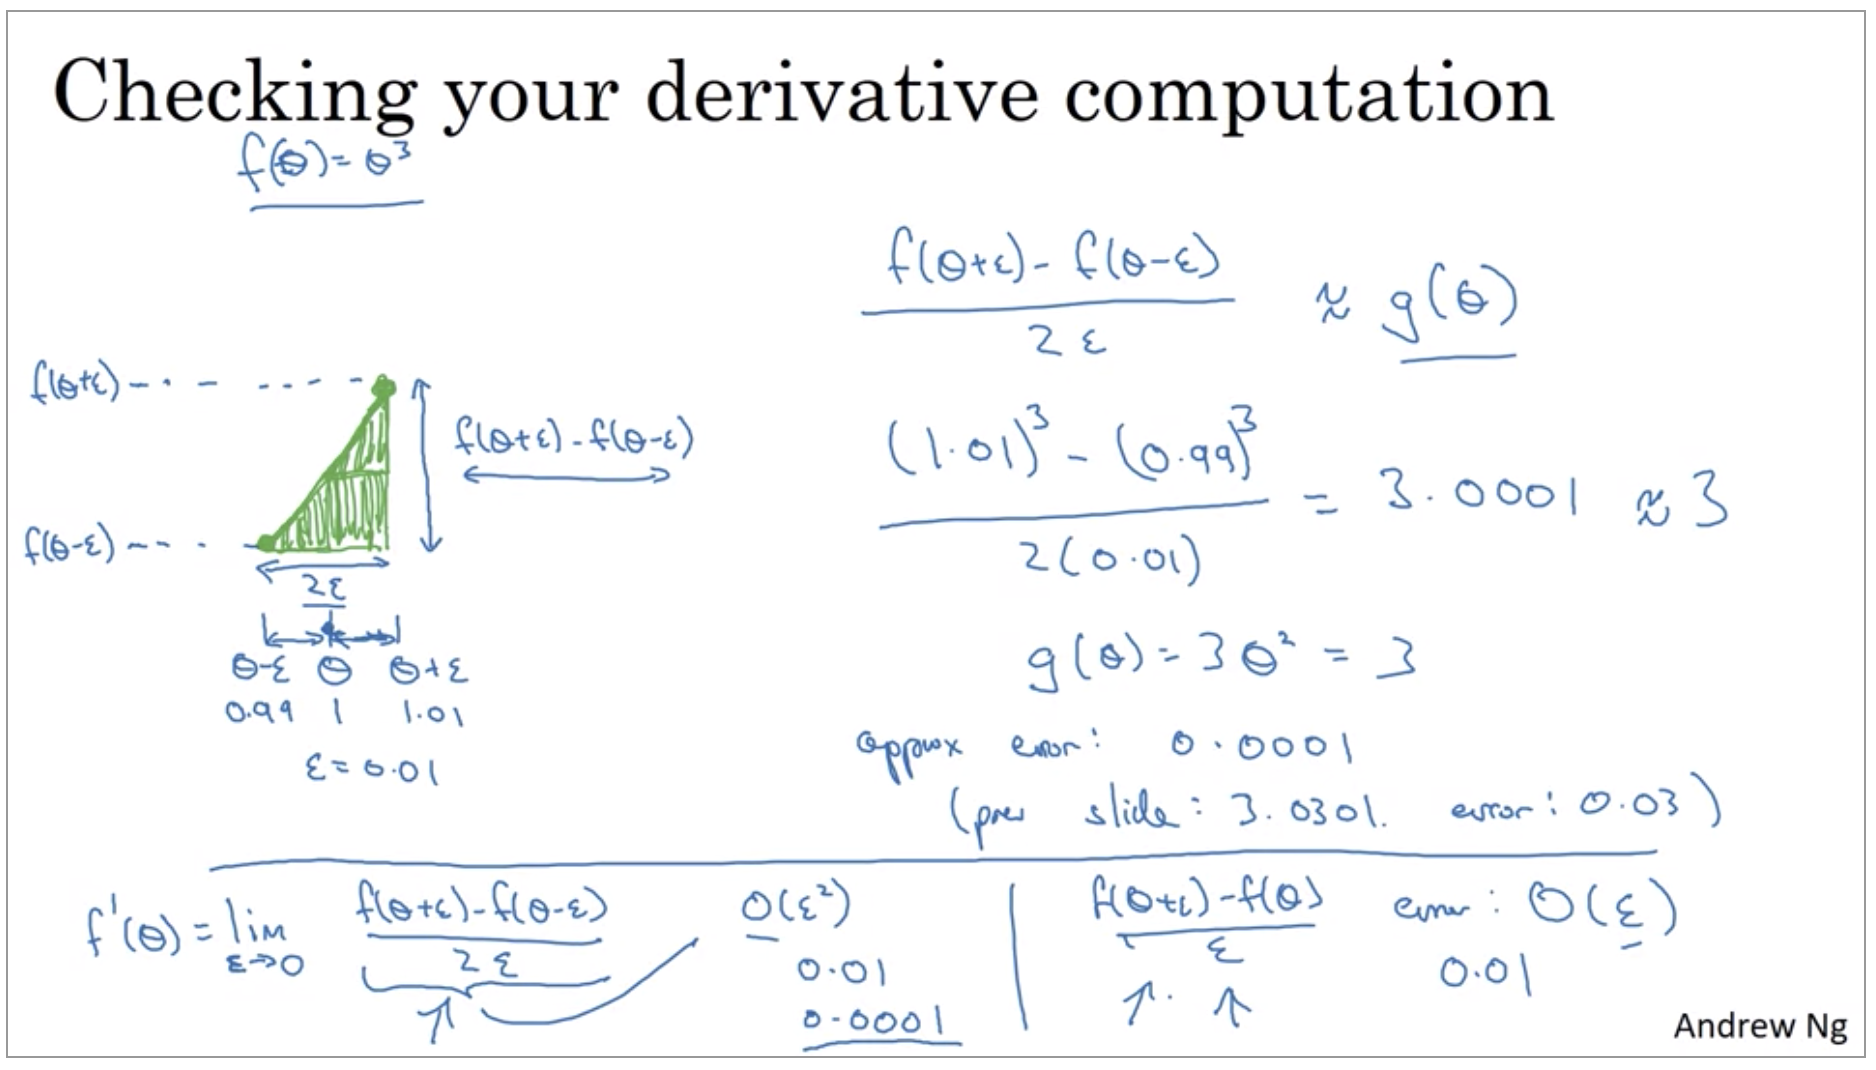 checking-your-derivative-computation.png